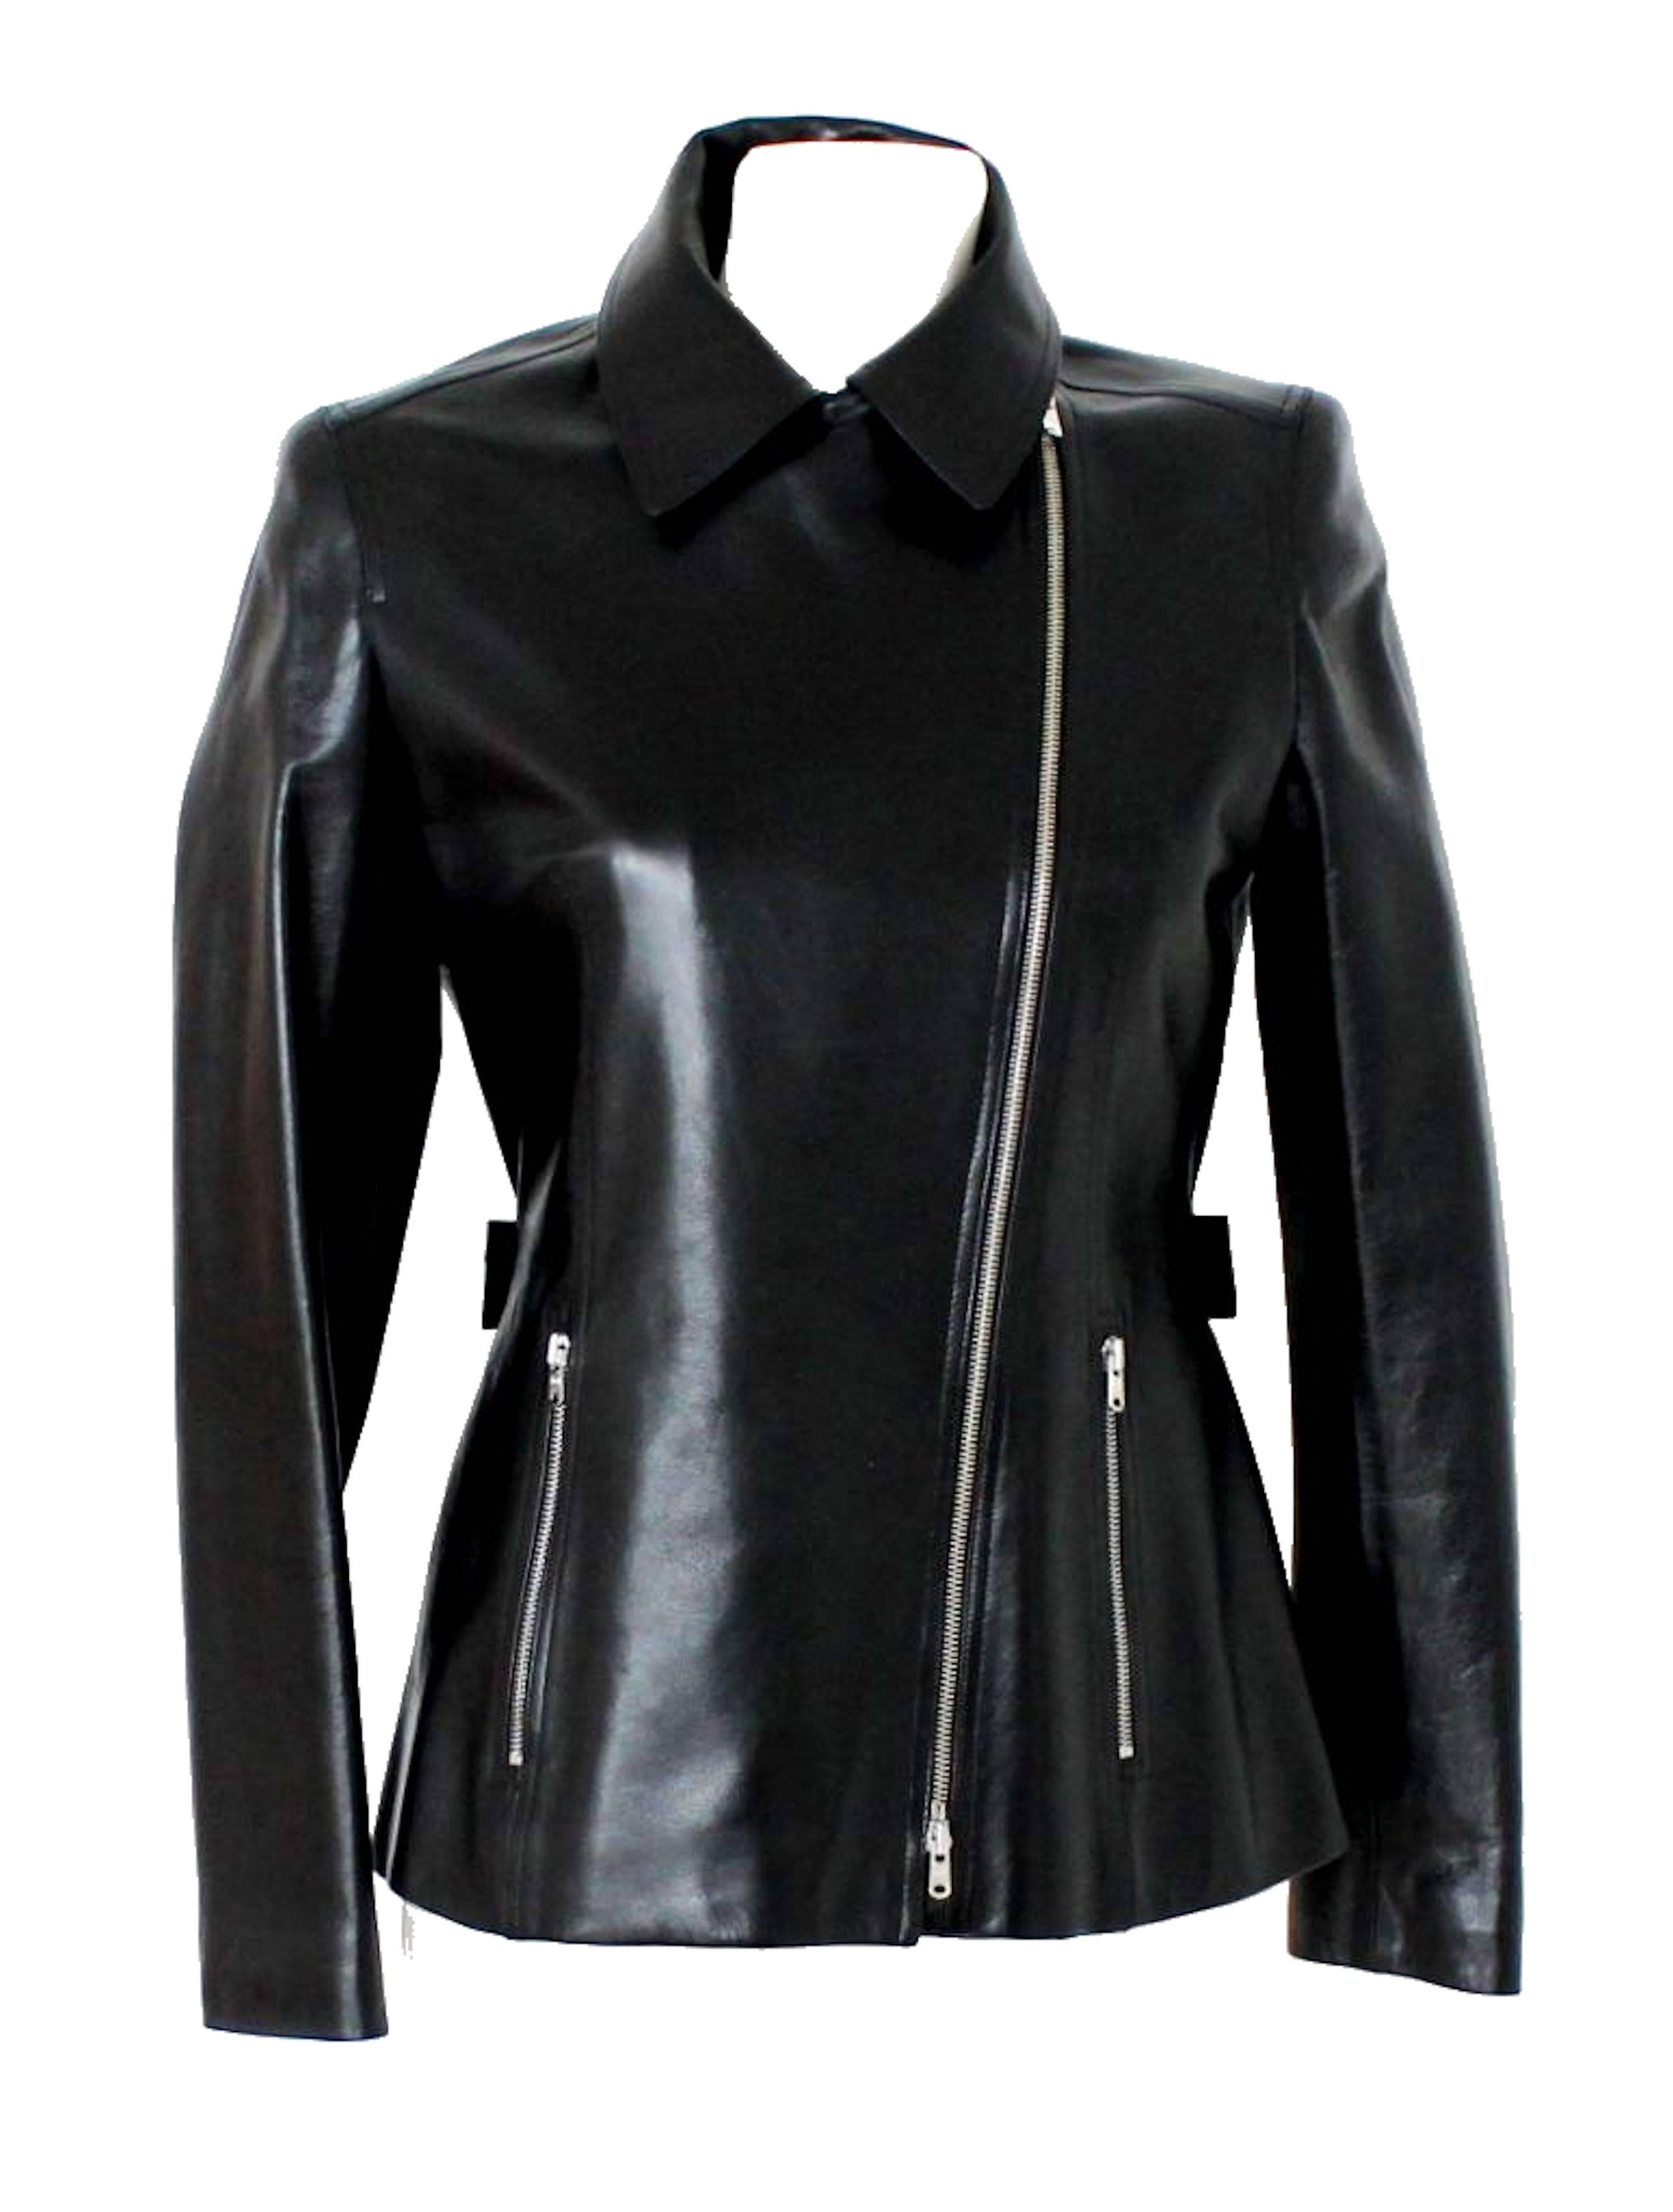 TIMELESS 7K$ AZZEDINE ALAIA BLACK NAPPA LEATHER BIKER MOTO JACKET


This beautiful jacket is both an absolute IT-PIECE and timeless classic!
An AZZEDINE ALAIA classic signature piece that will last you for years
Currently selling at NETAPORTER for